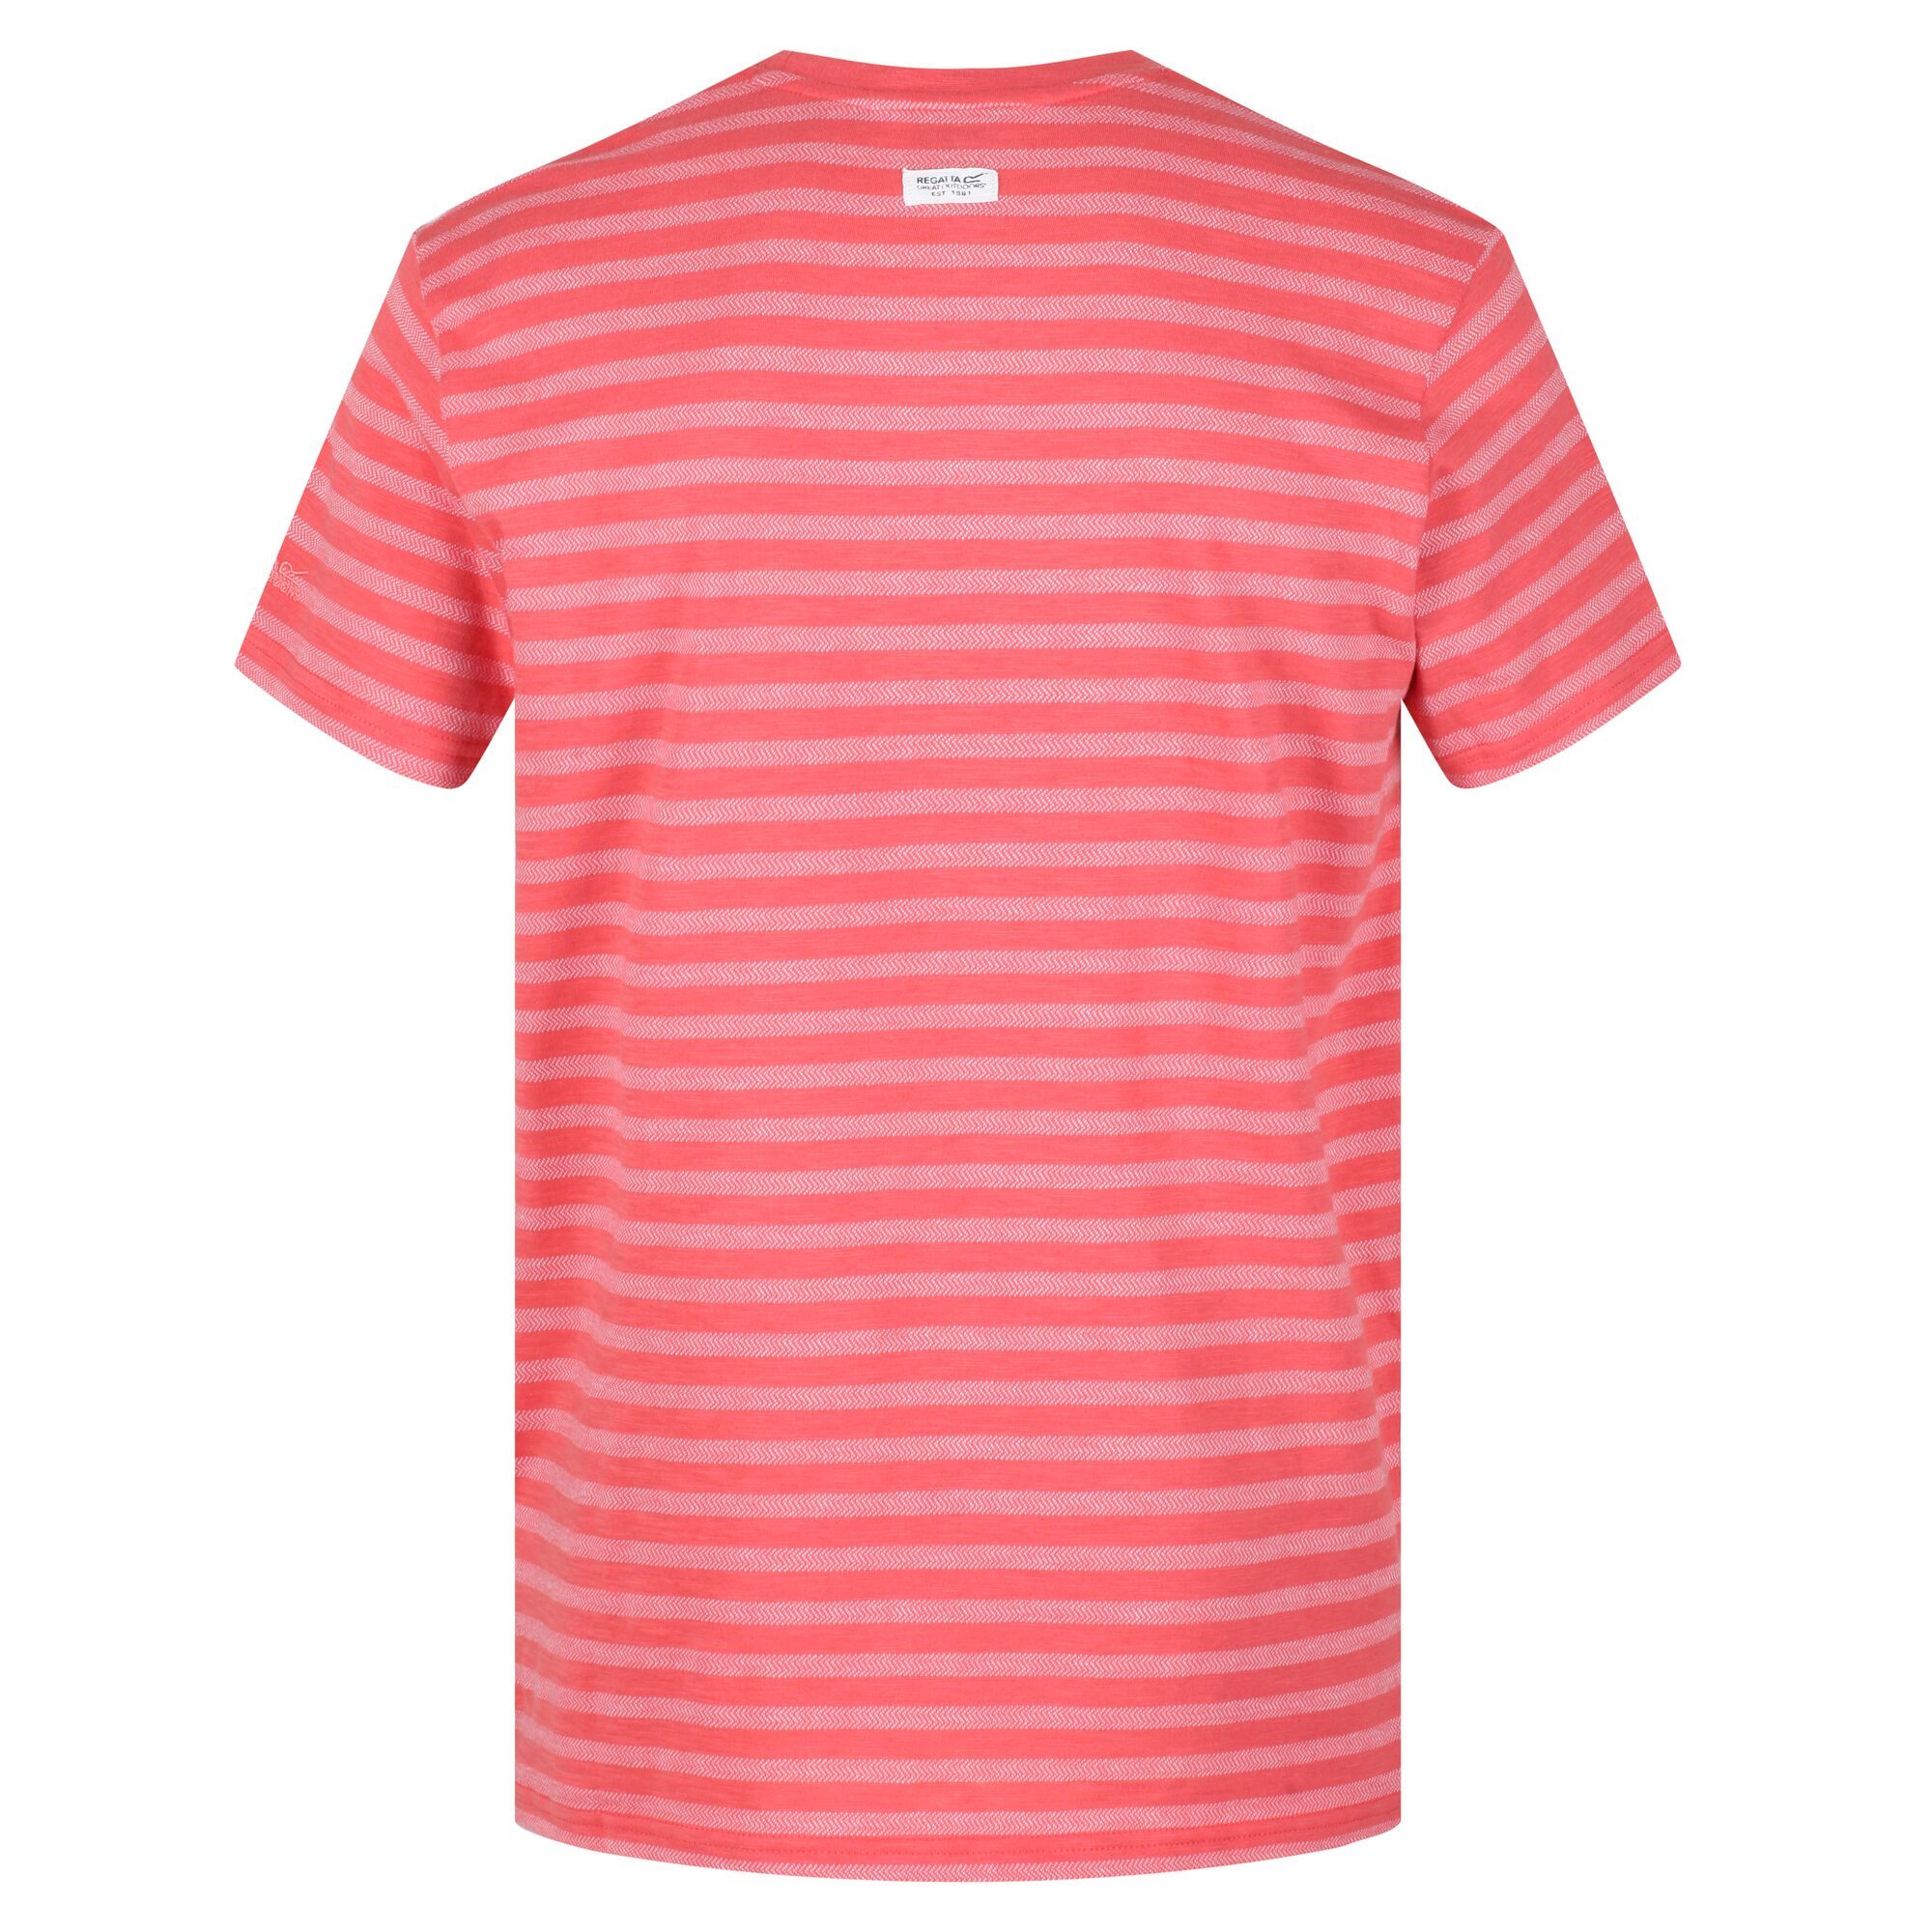 Material: coolweave 100% cotton herringbone striped fabric. Crew neck. Short sleeves.